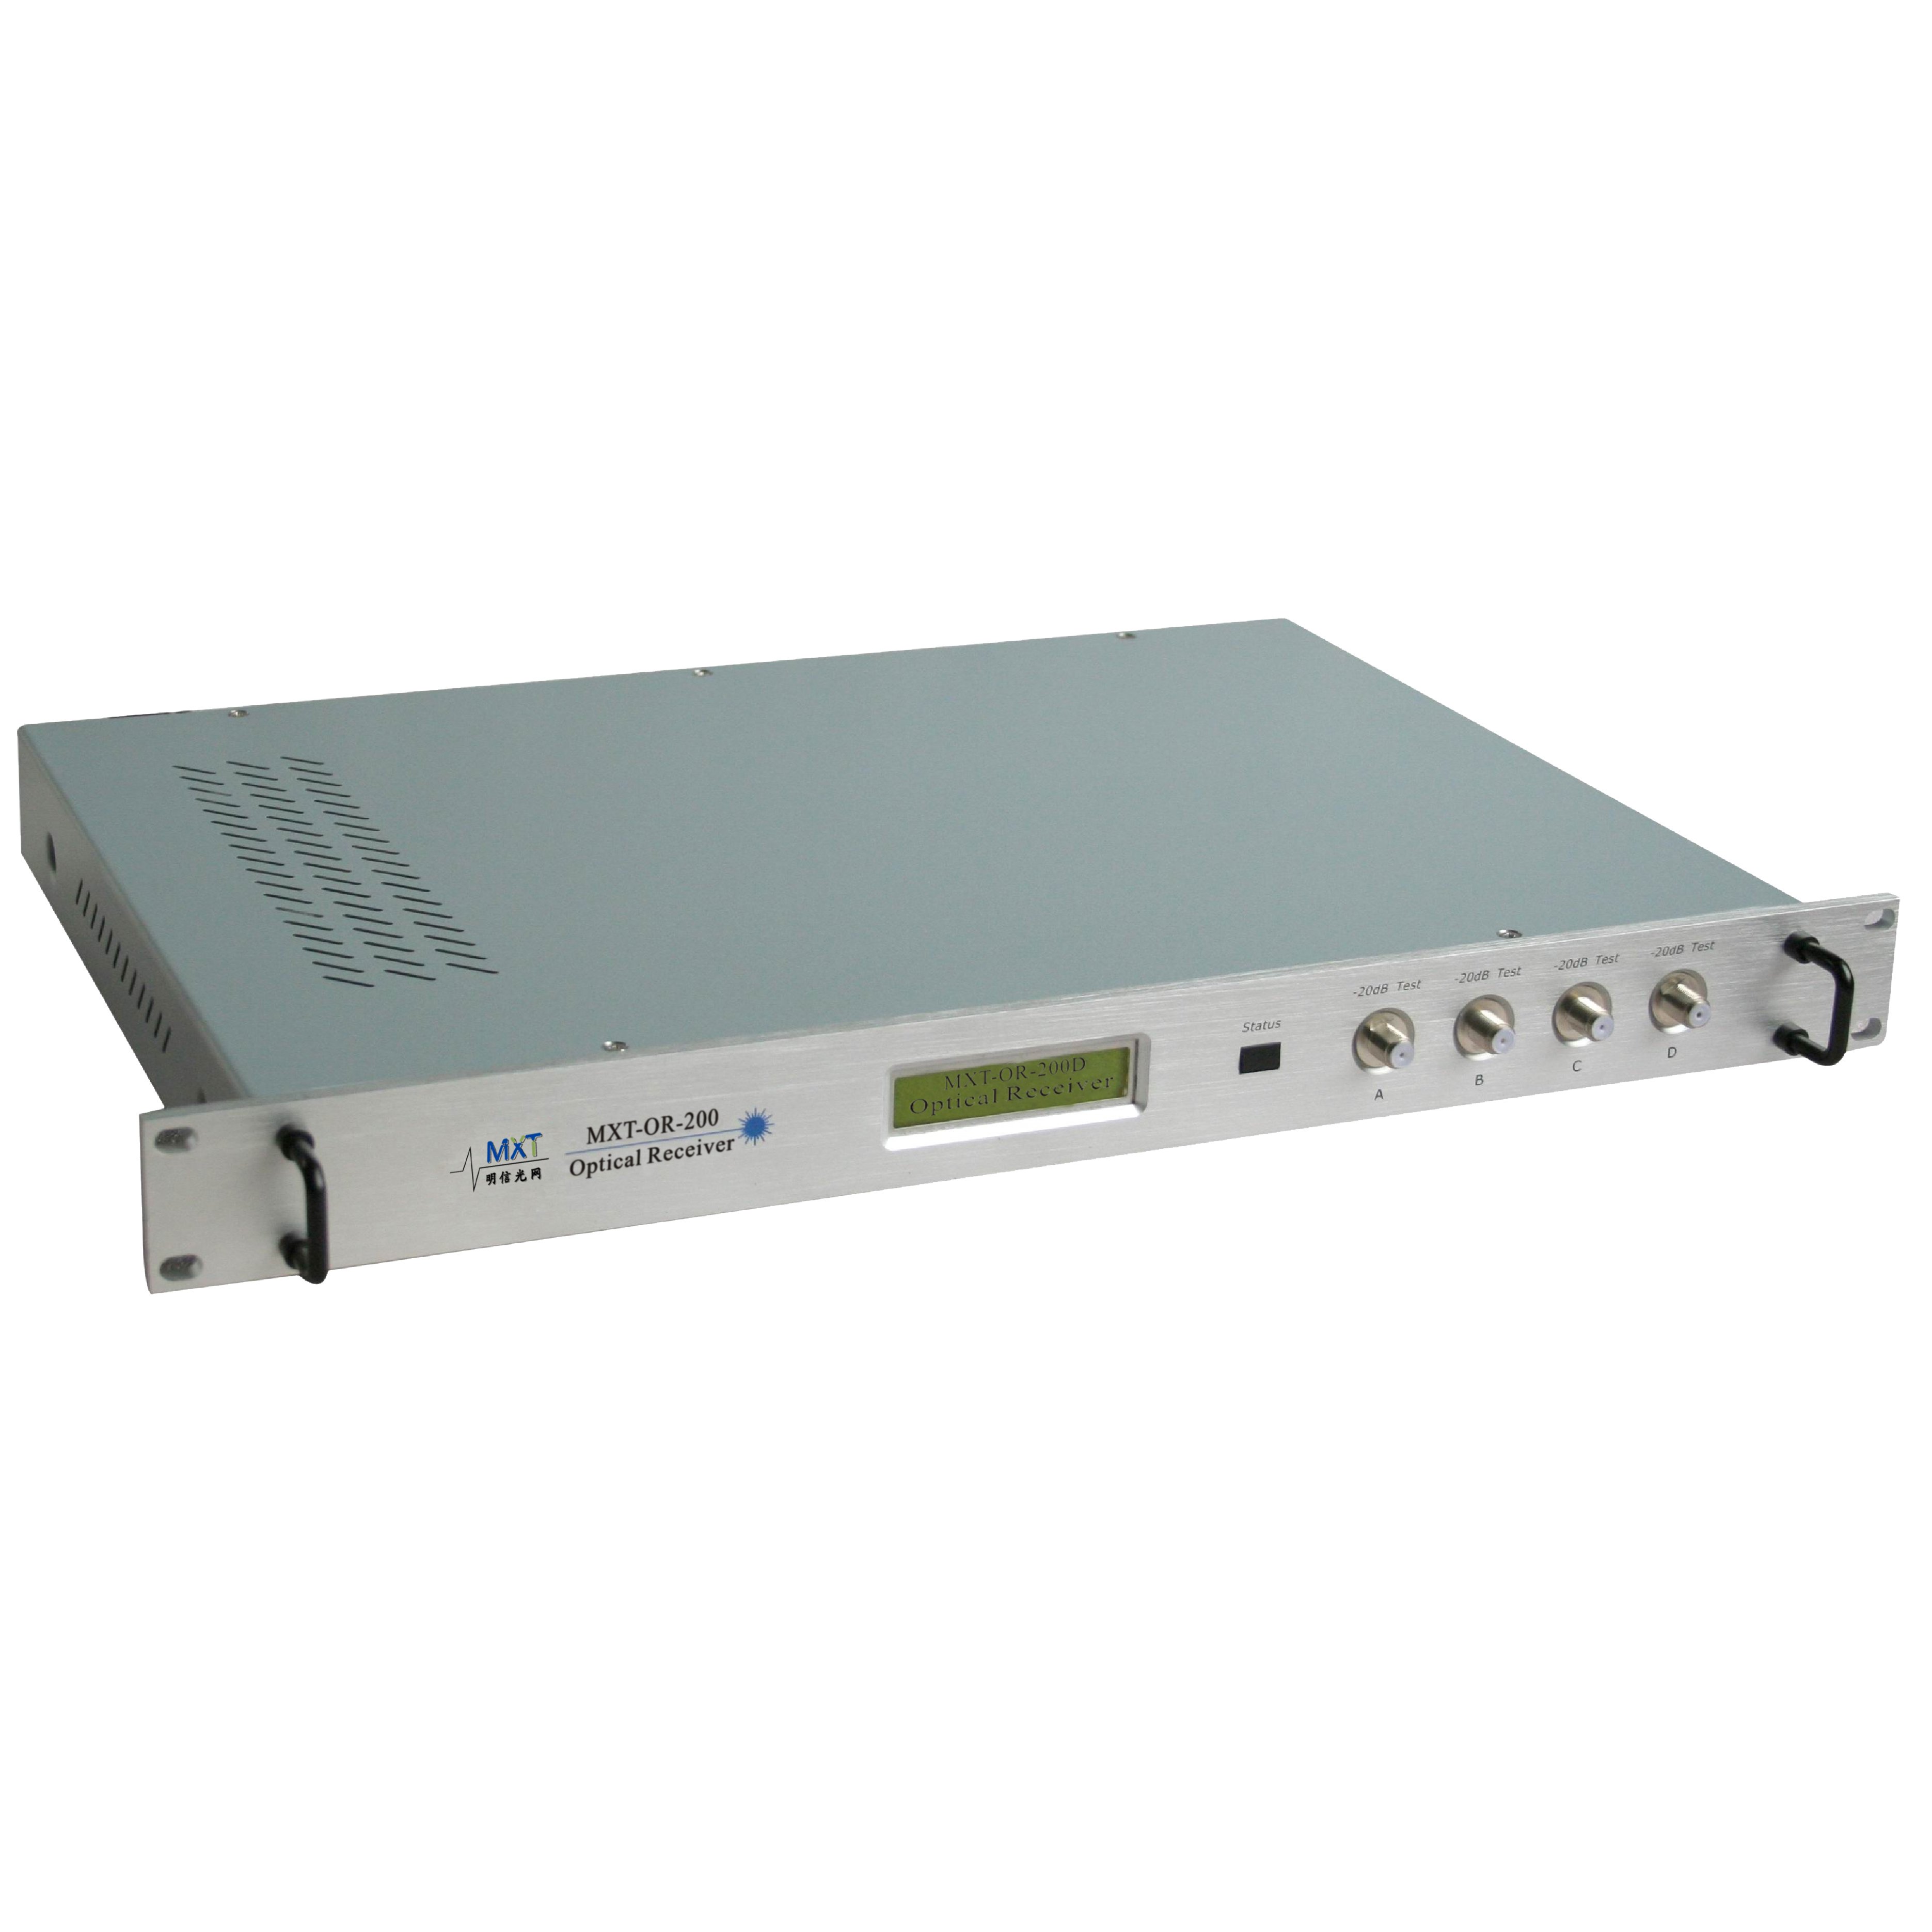 MXT-OR-200 Series Reverse Optical Receiver